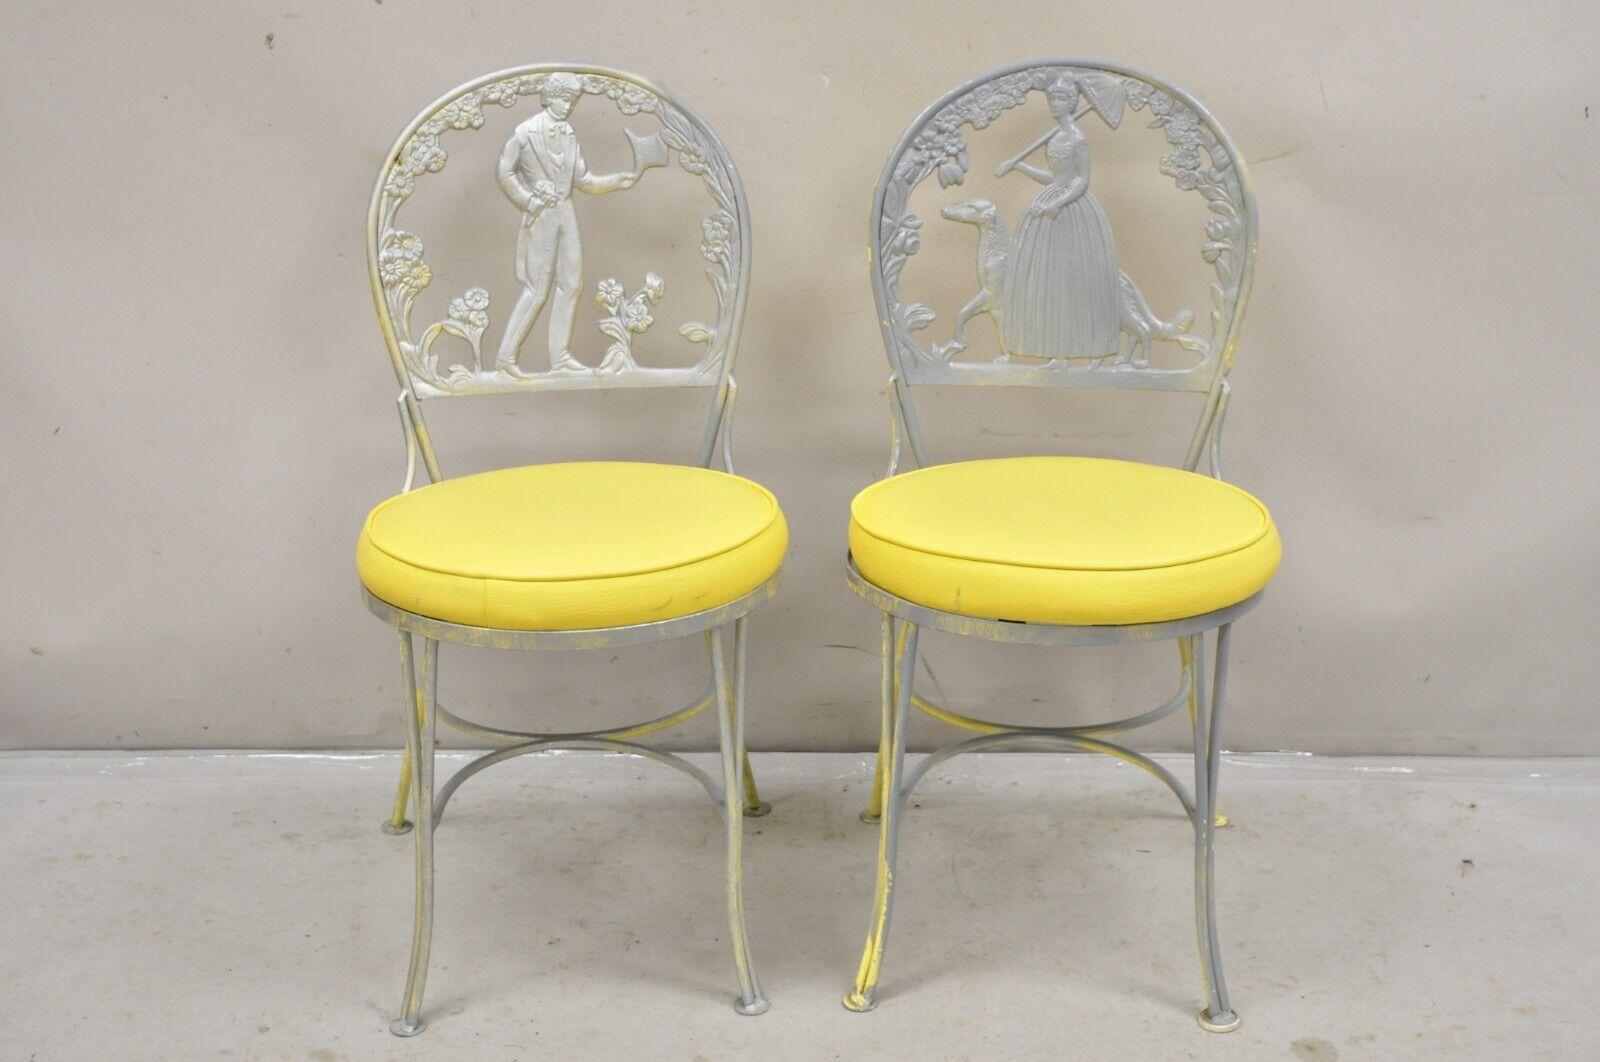 Victorian Style Cast Aluminum Courting Scene Garden Patio Bistro Chairs - a Pair For Sale 7